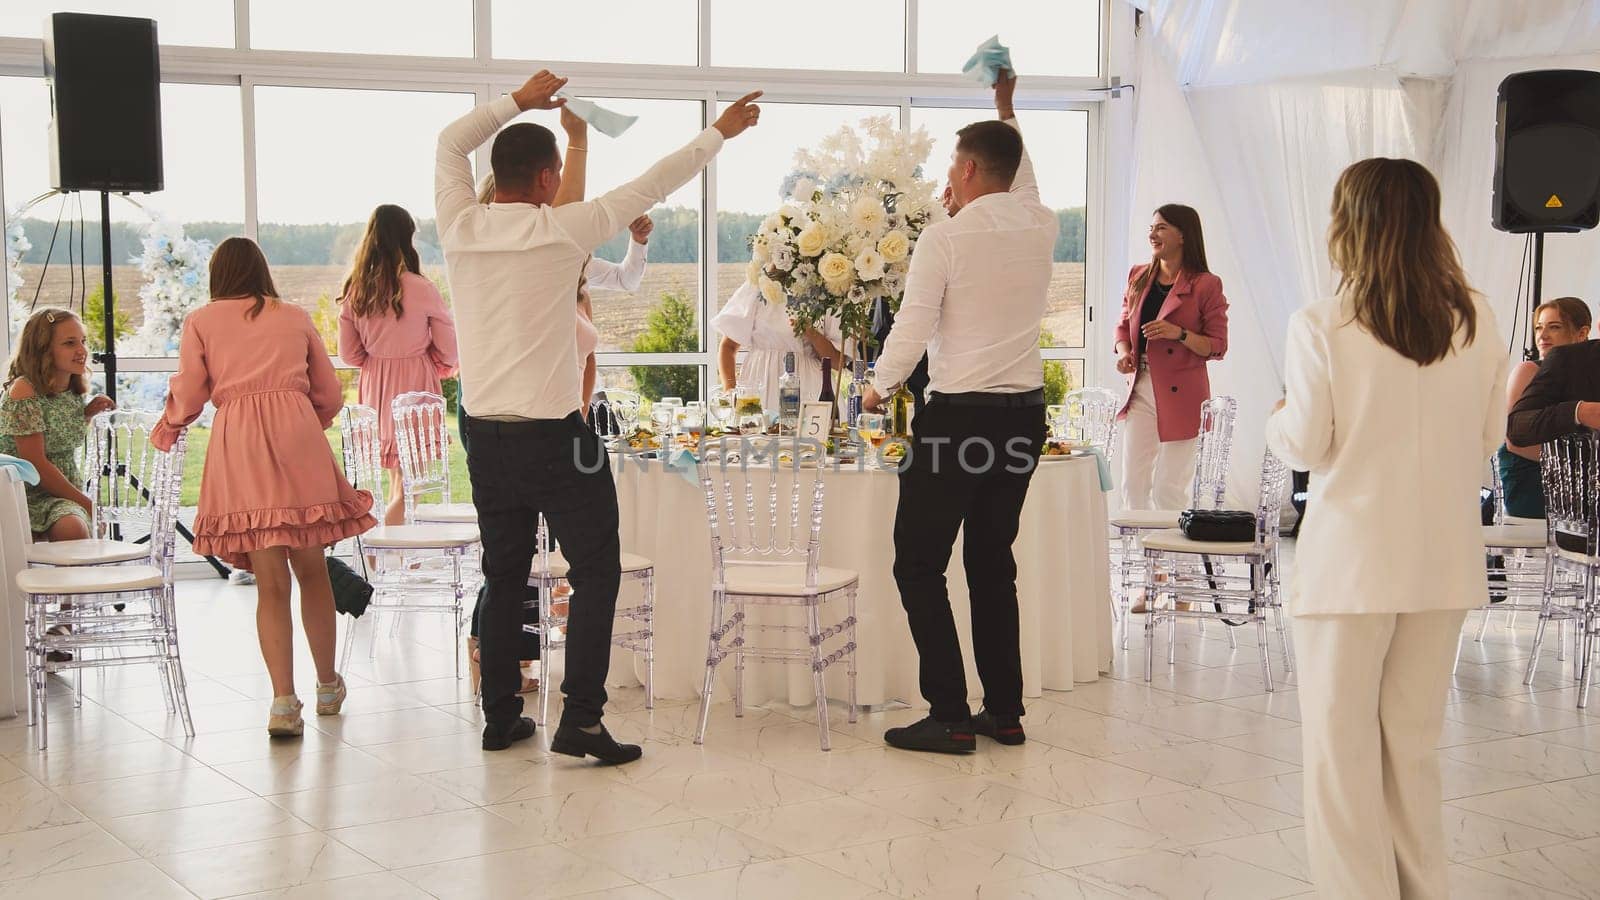 People dancing at the wedding day banquet